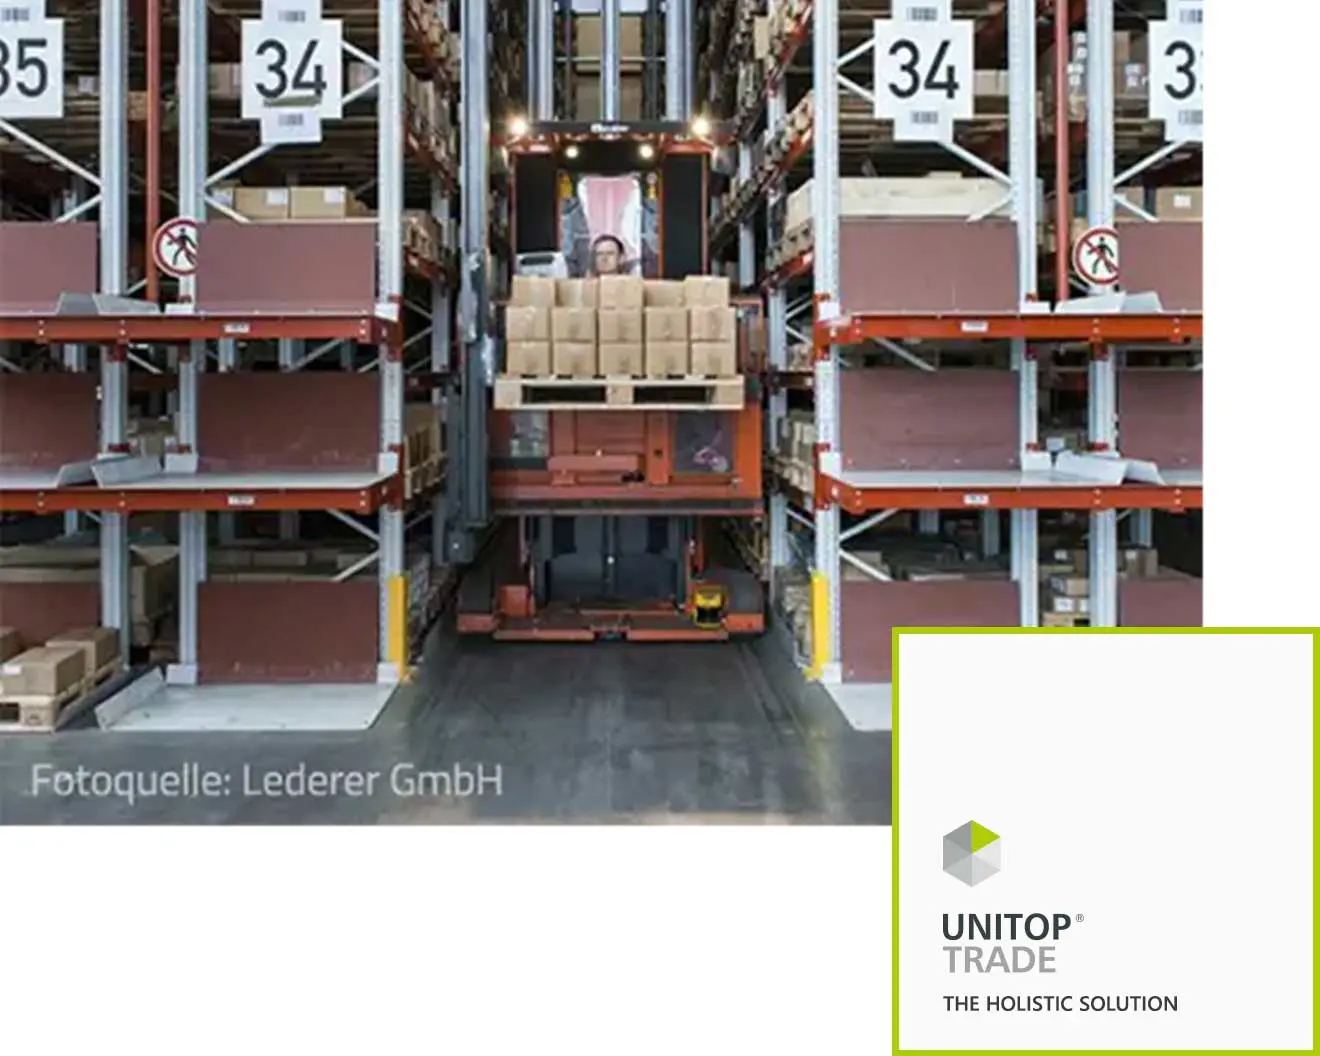 Automated storage system with boxes and unitop trade logo at the bottom right